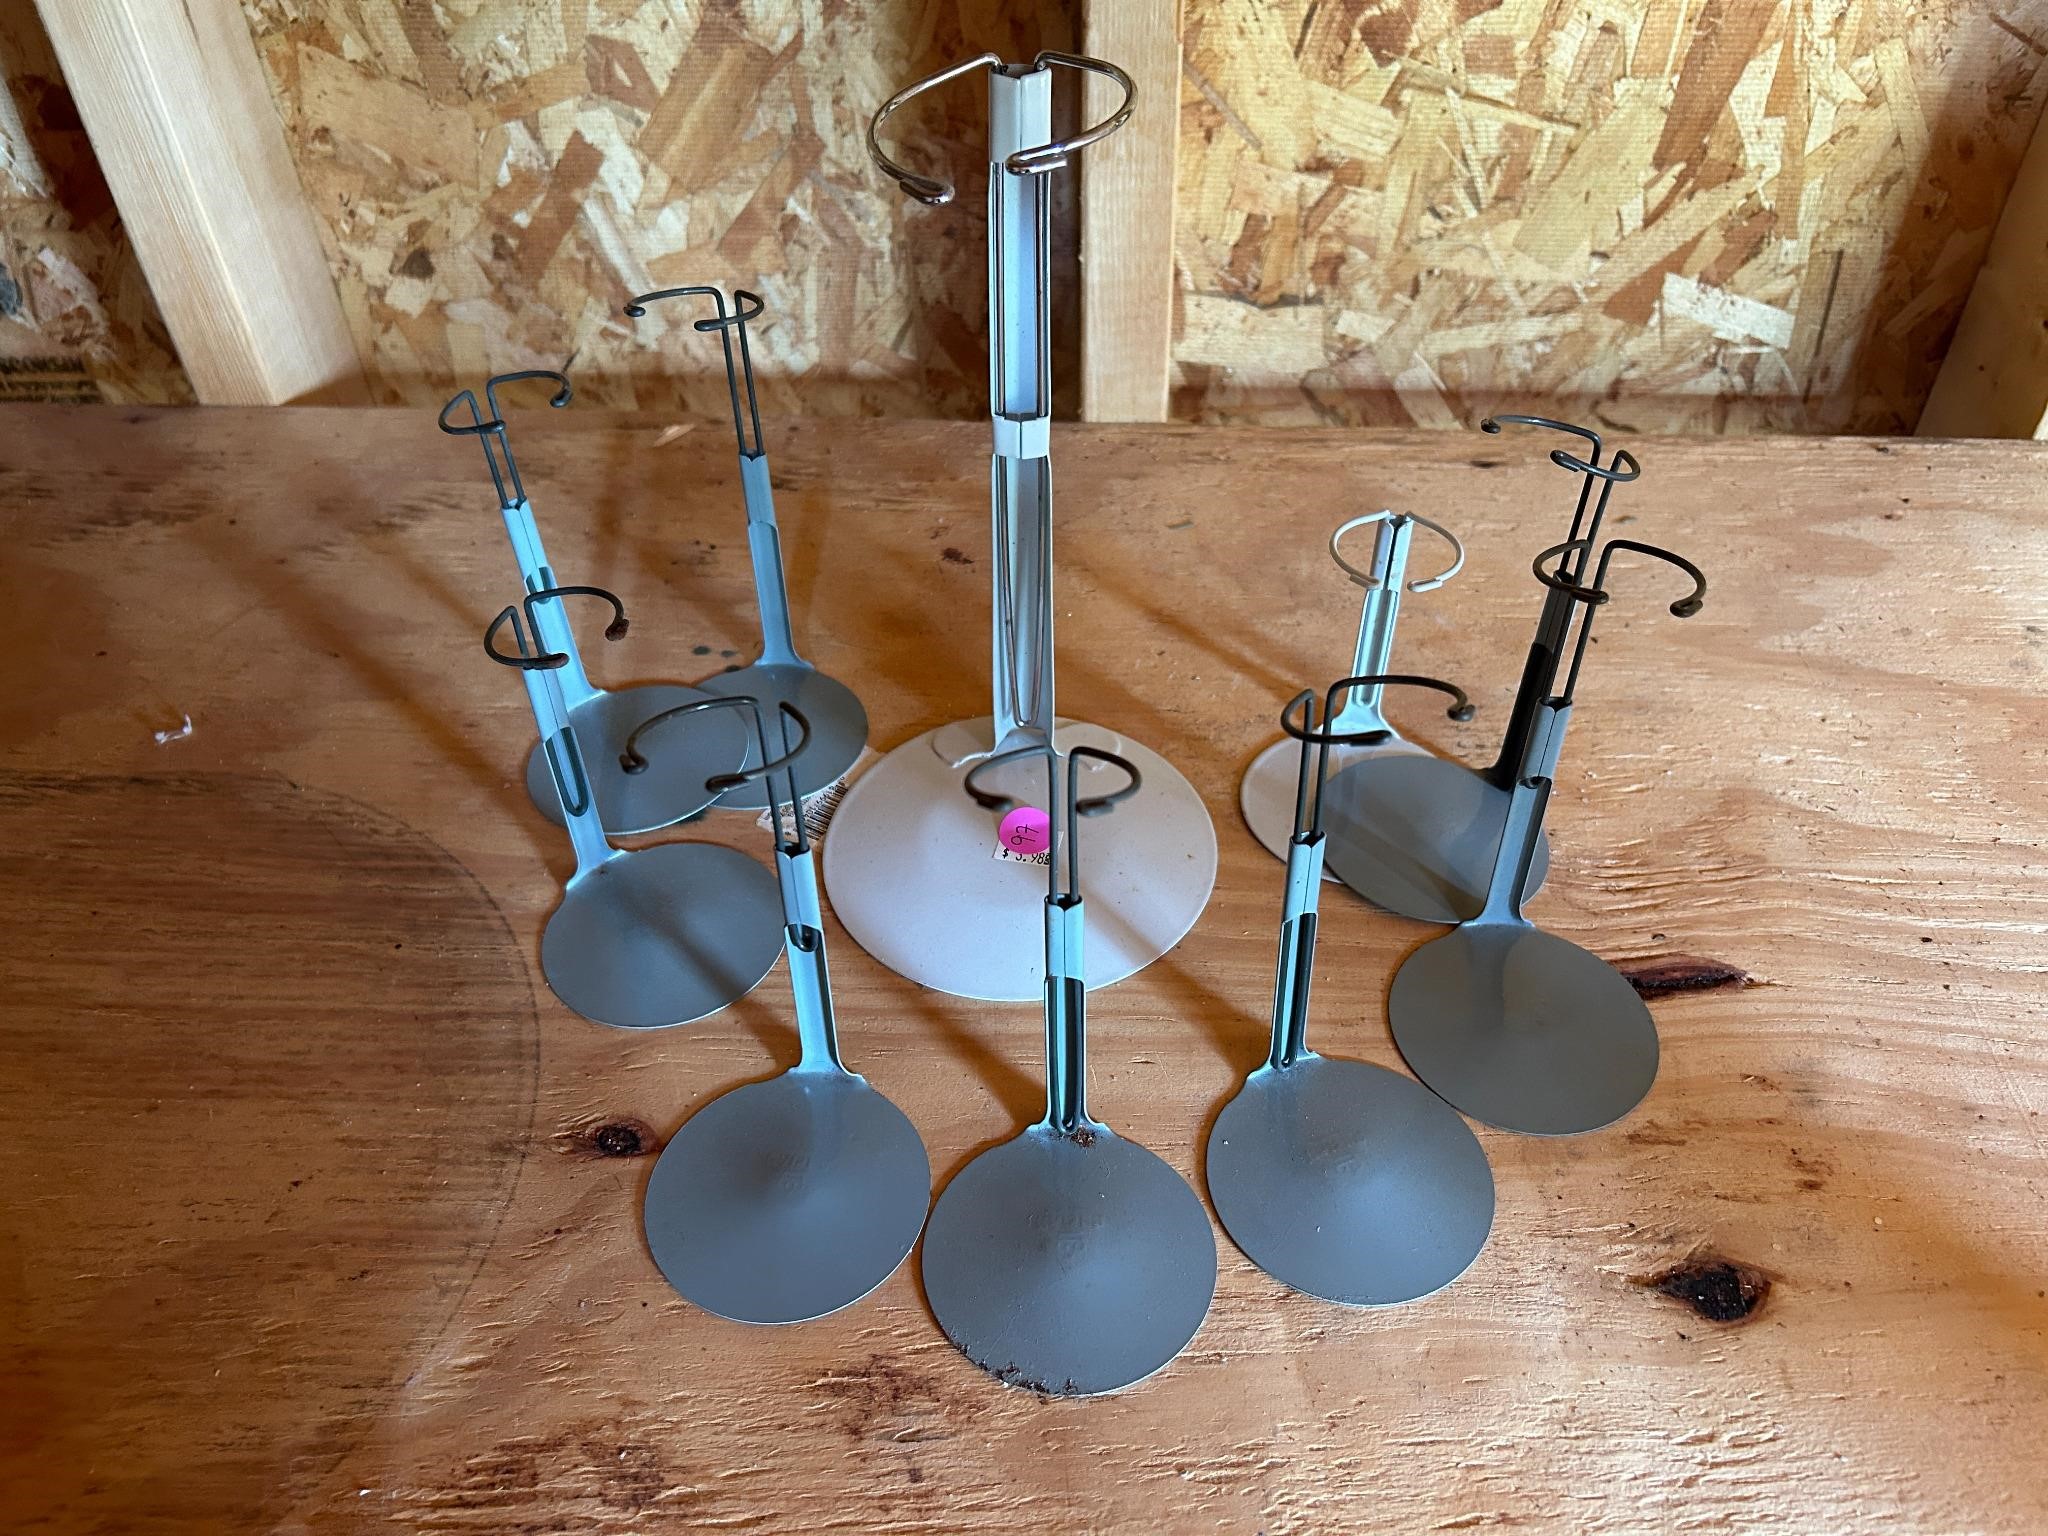 (10) Doll Stands - sizes vary